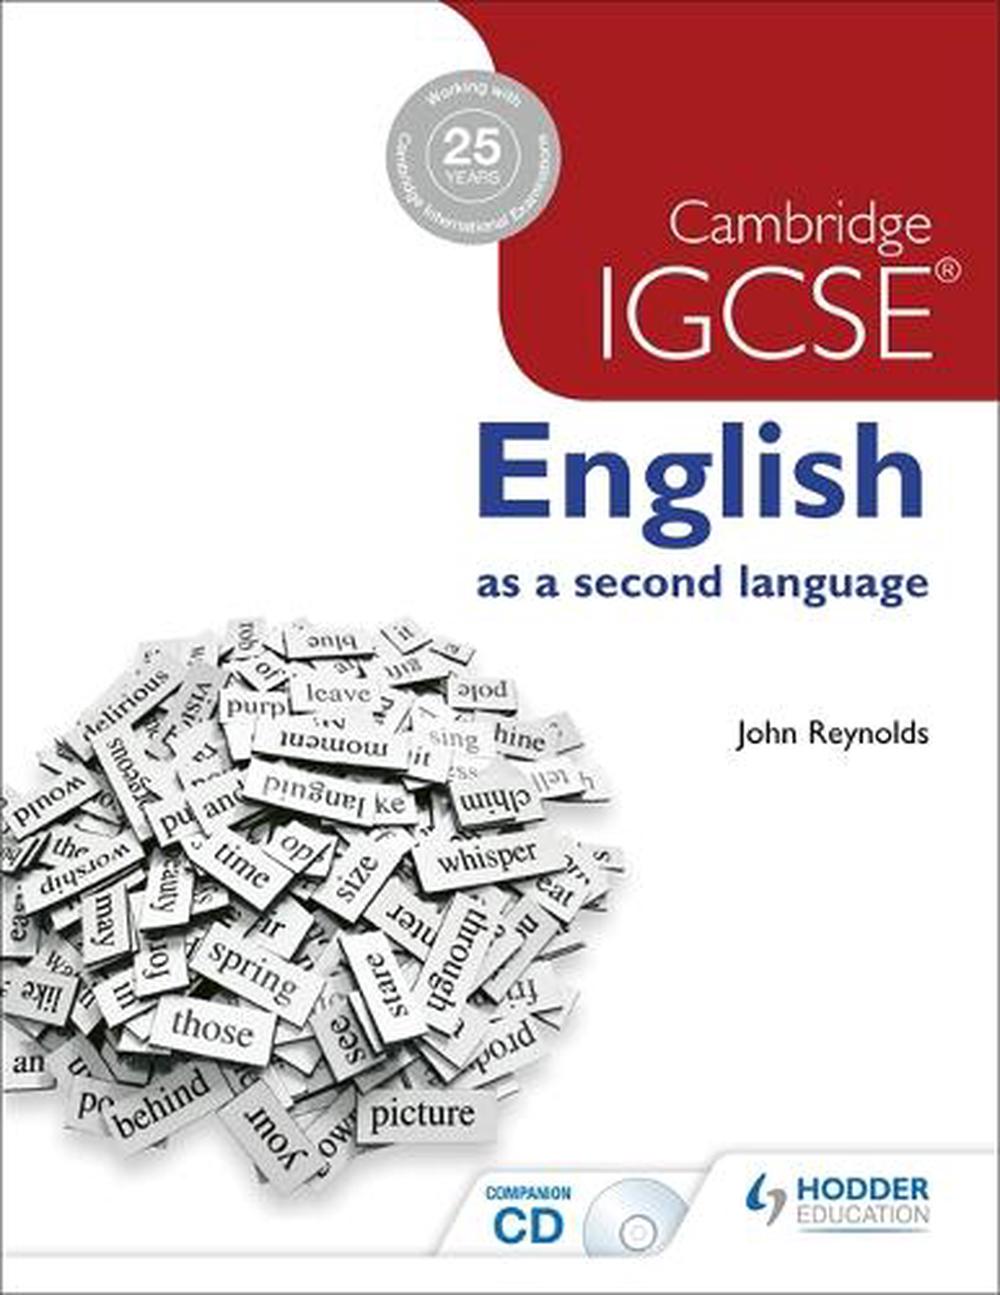 how to write an article igcse english as a second language